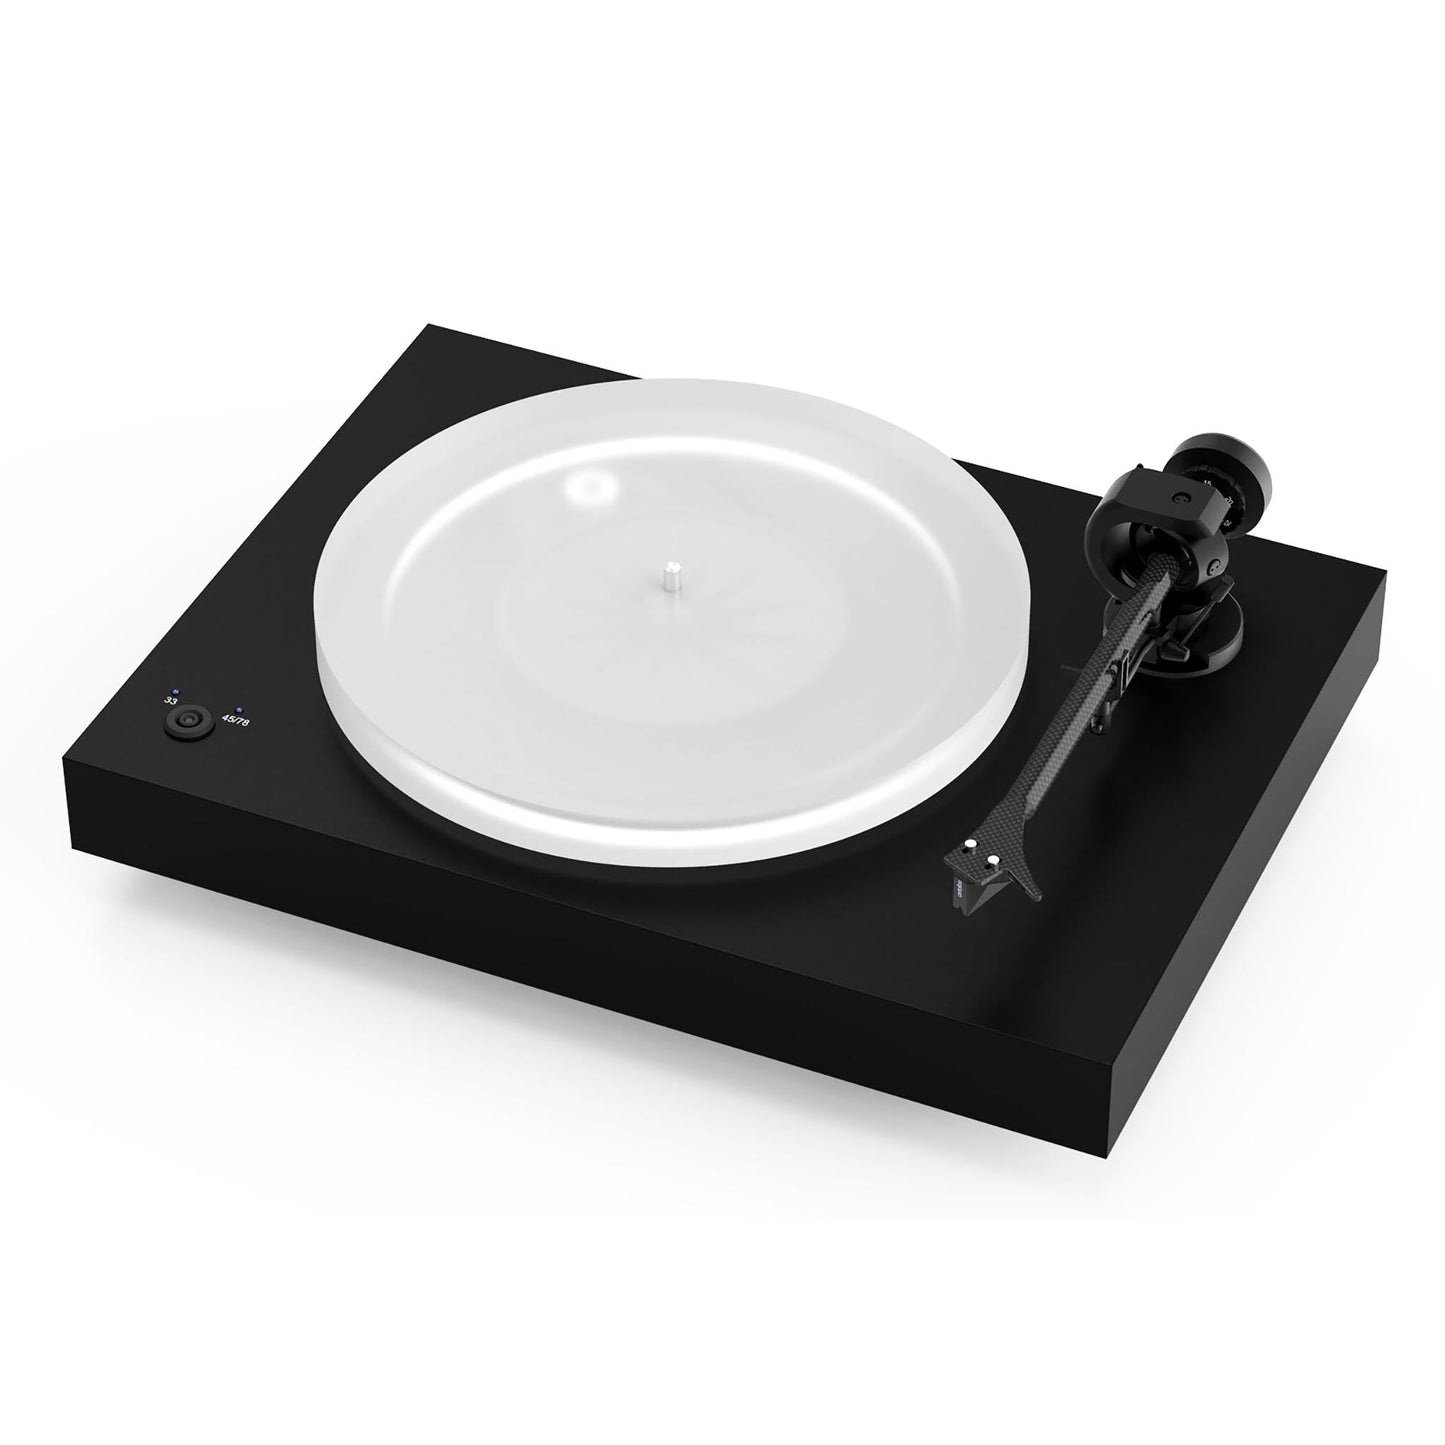 Pro-Ject X2 B Turntable